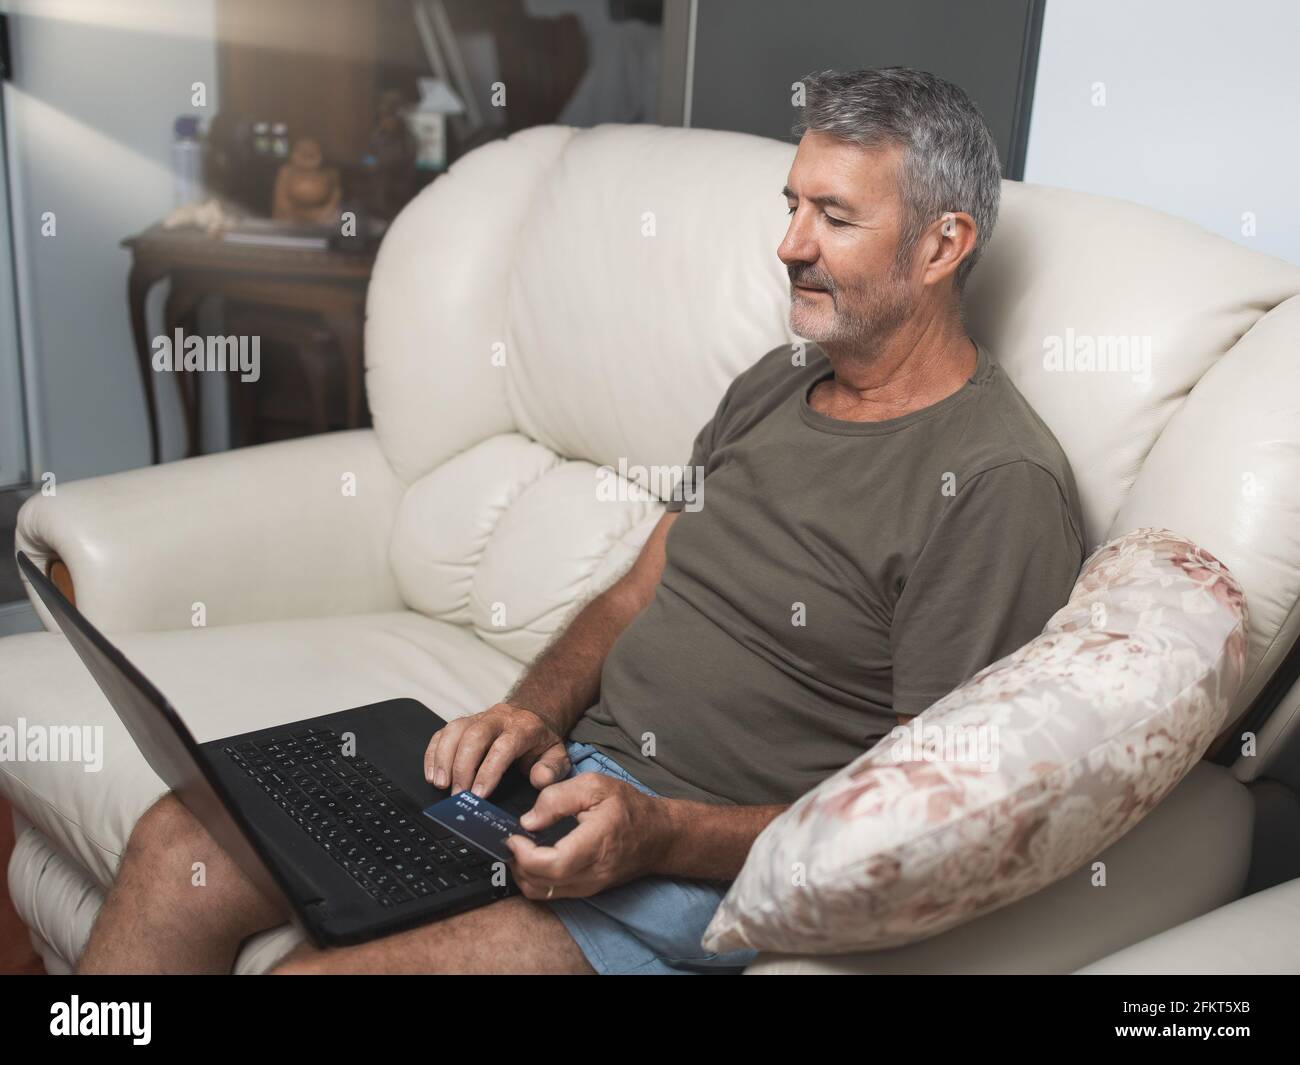 Smiling middle aged man sitting on the couch using the laptop to buy online at home Stock Photo